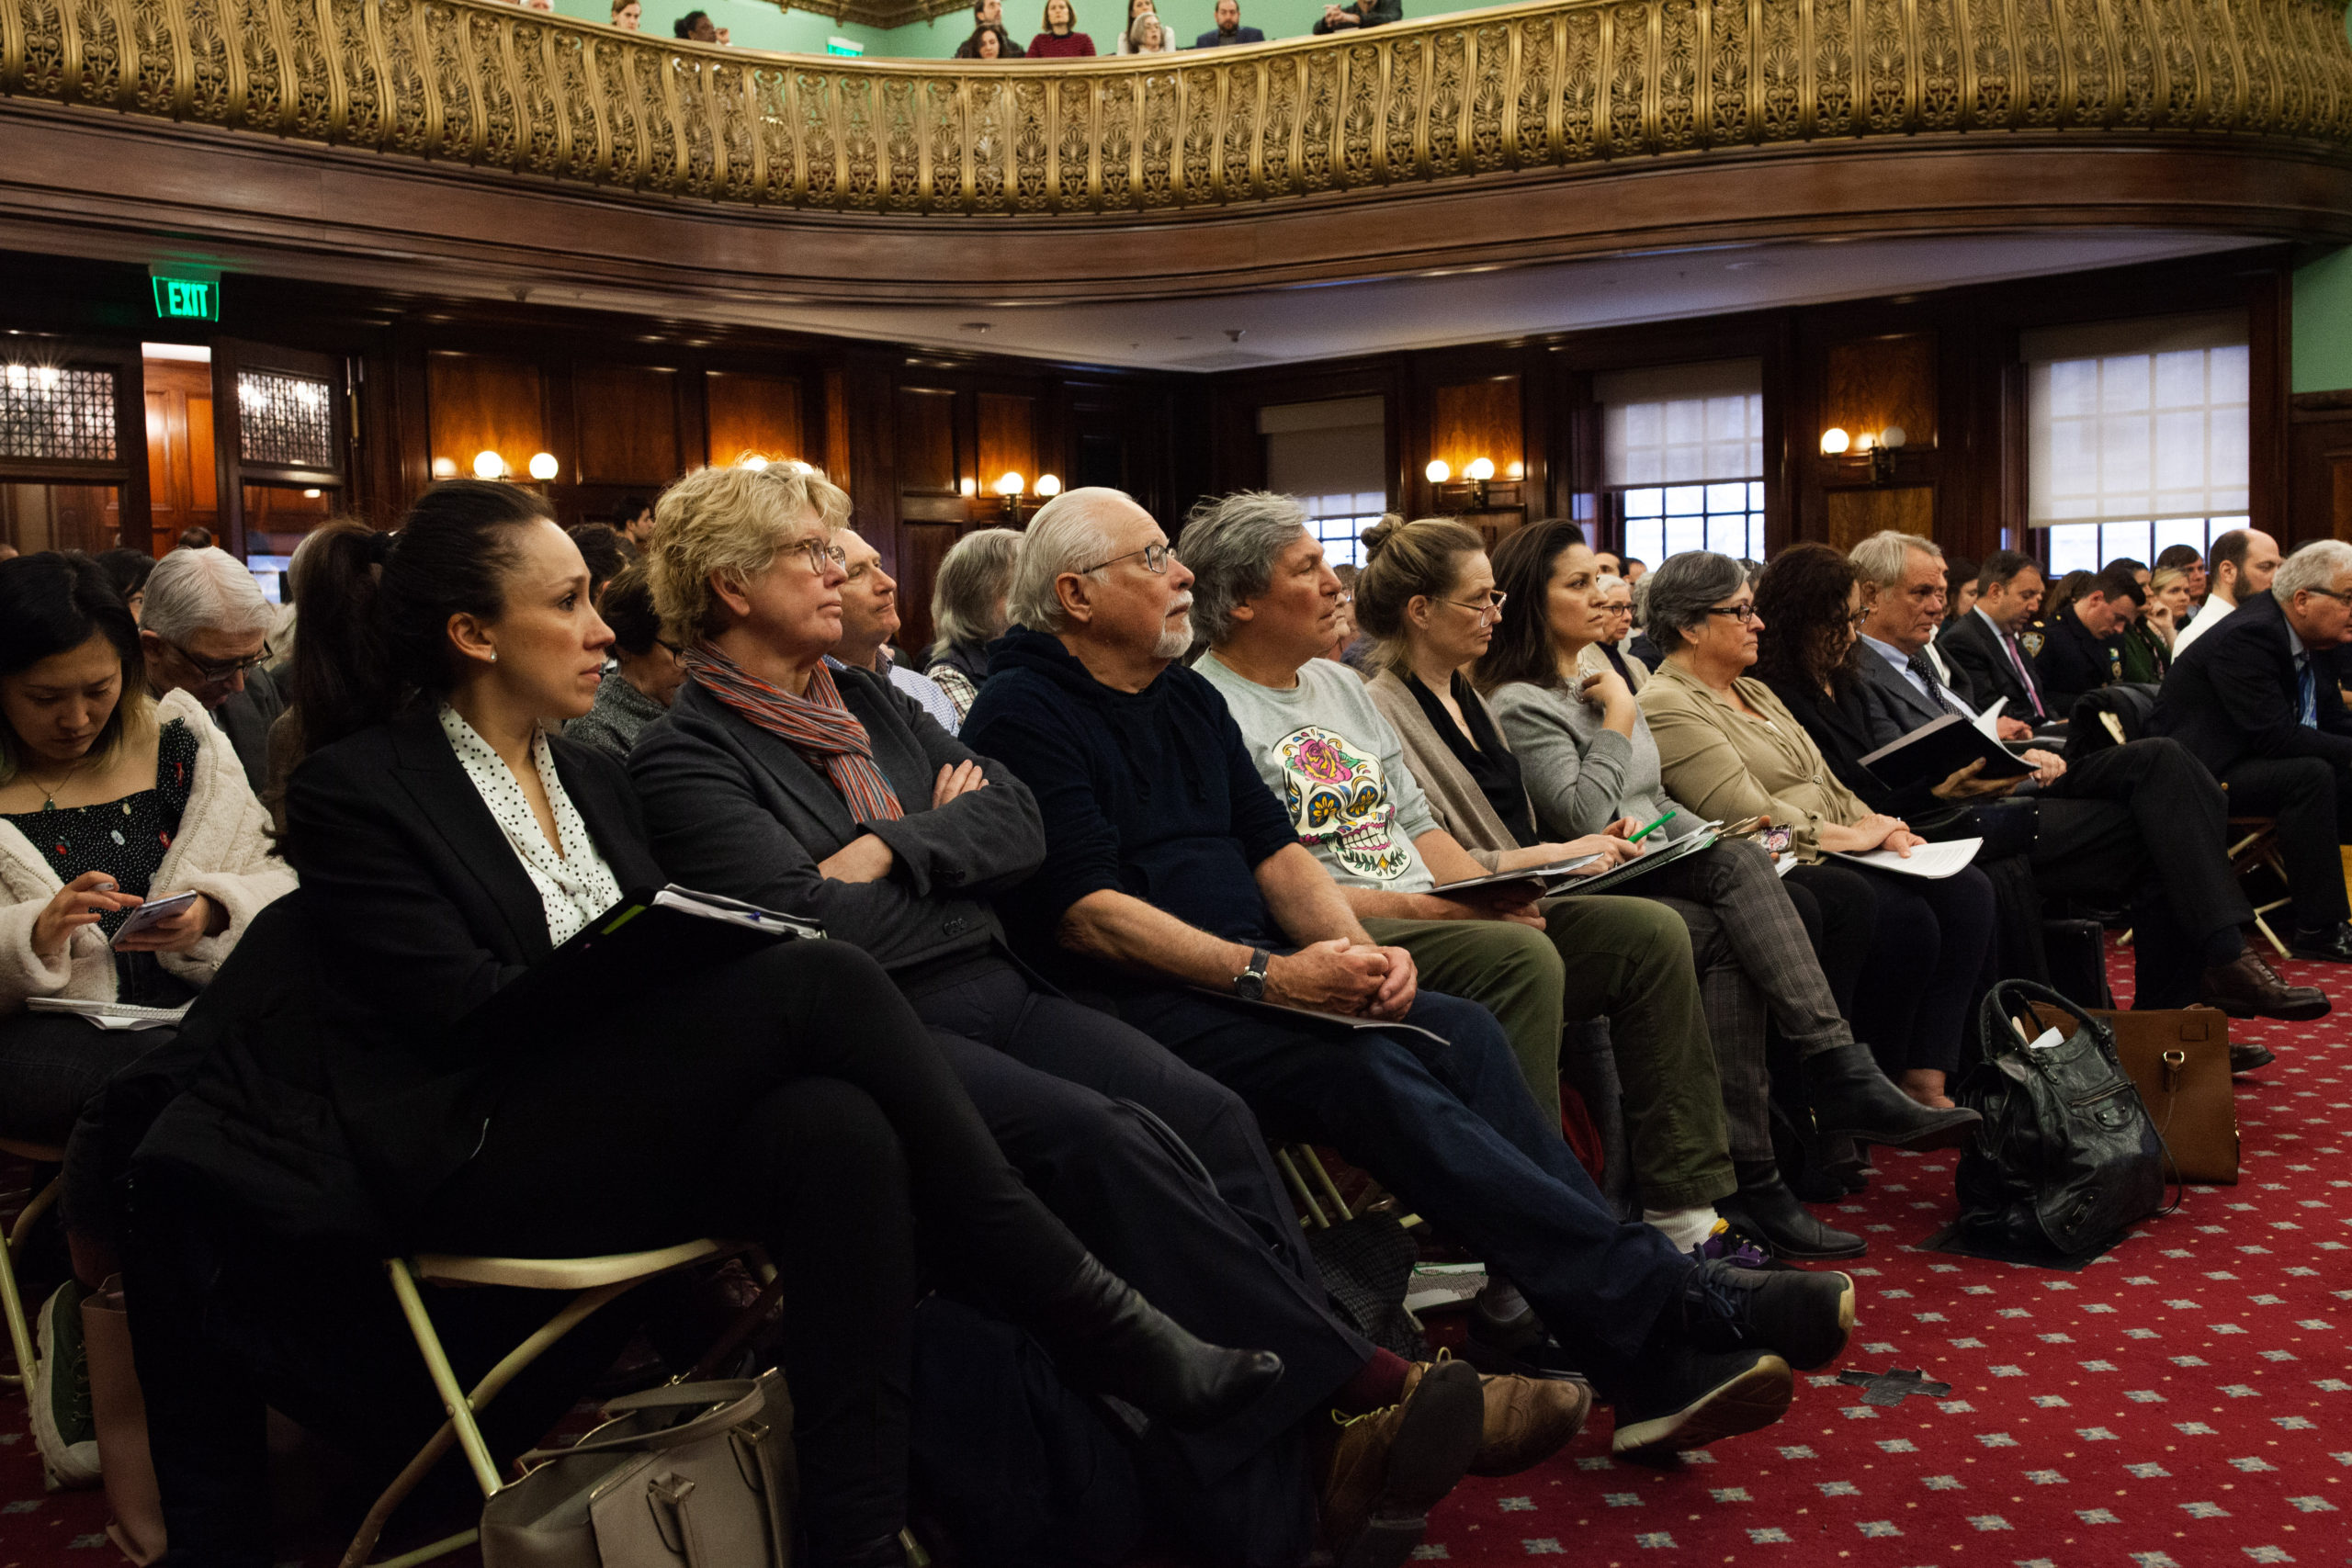 The crowd at Tuesday’s hearing on recommendations released by the Council and its engineering firm Arup. Photo: Paul Frangipane, Brooklyn Eagle